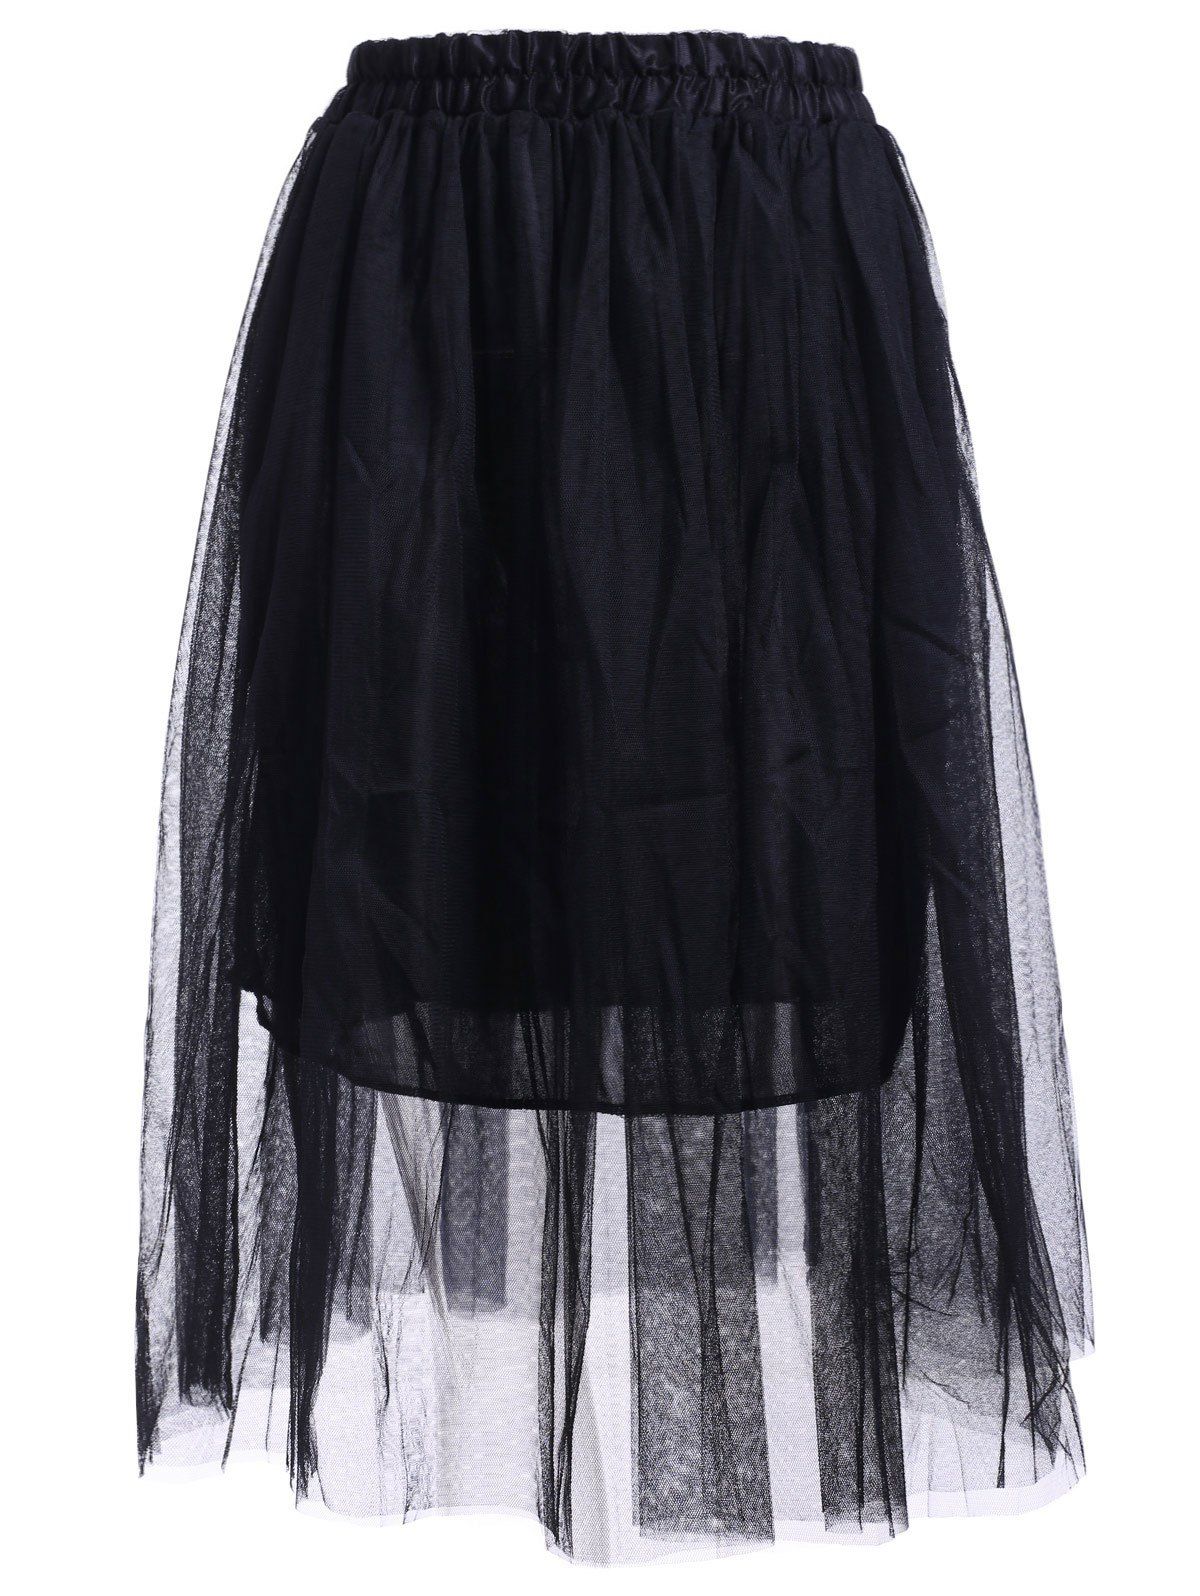 Elastic Waist Puff Five Layers Tulle Skirt - BLACK FREE SIZE